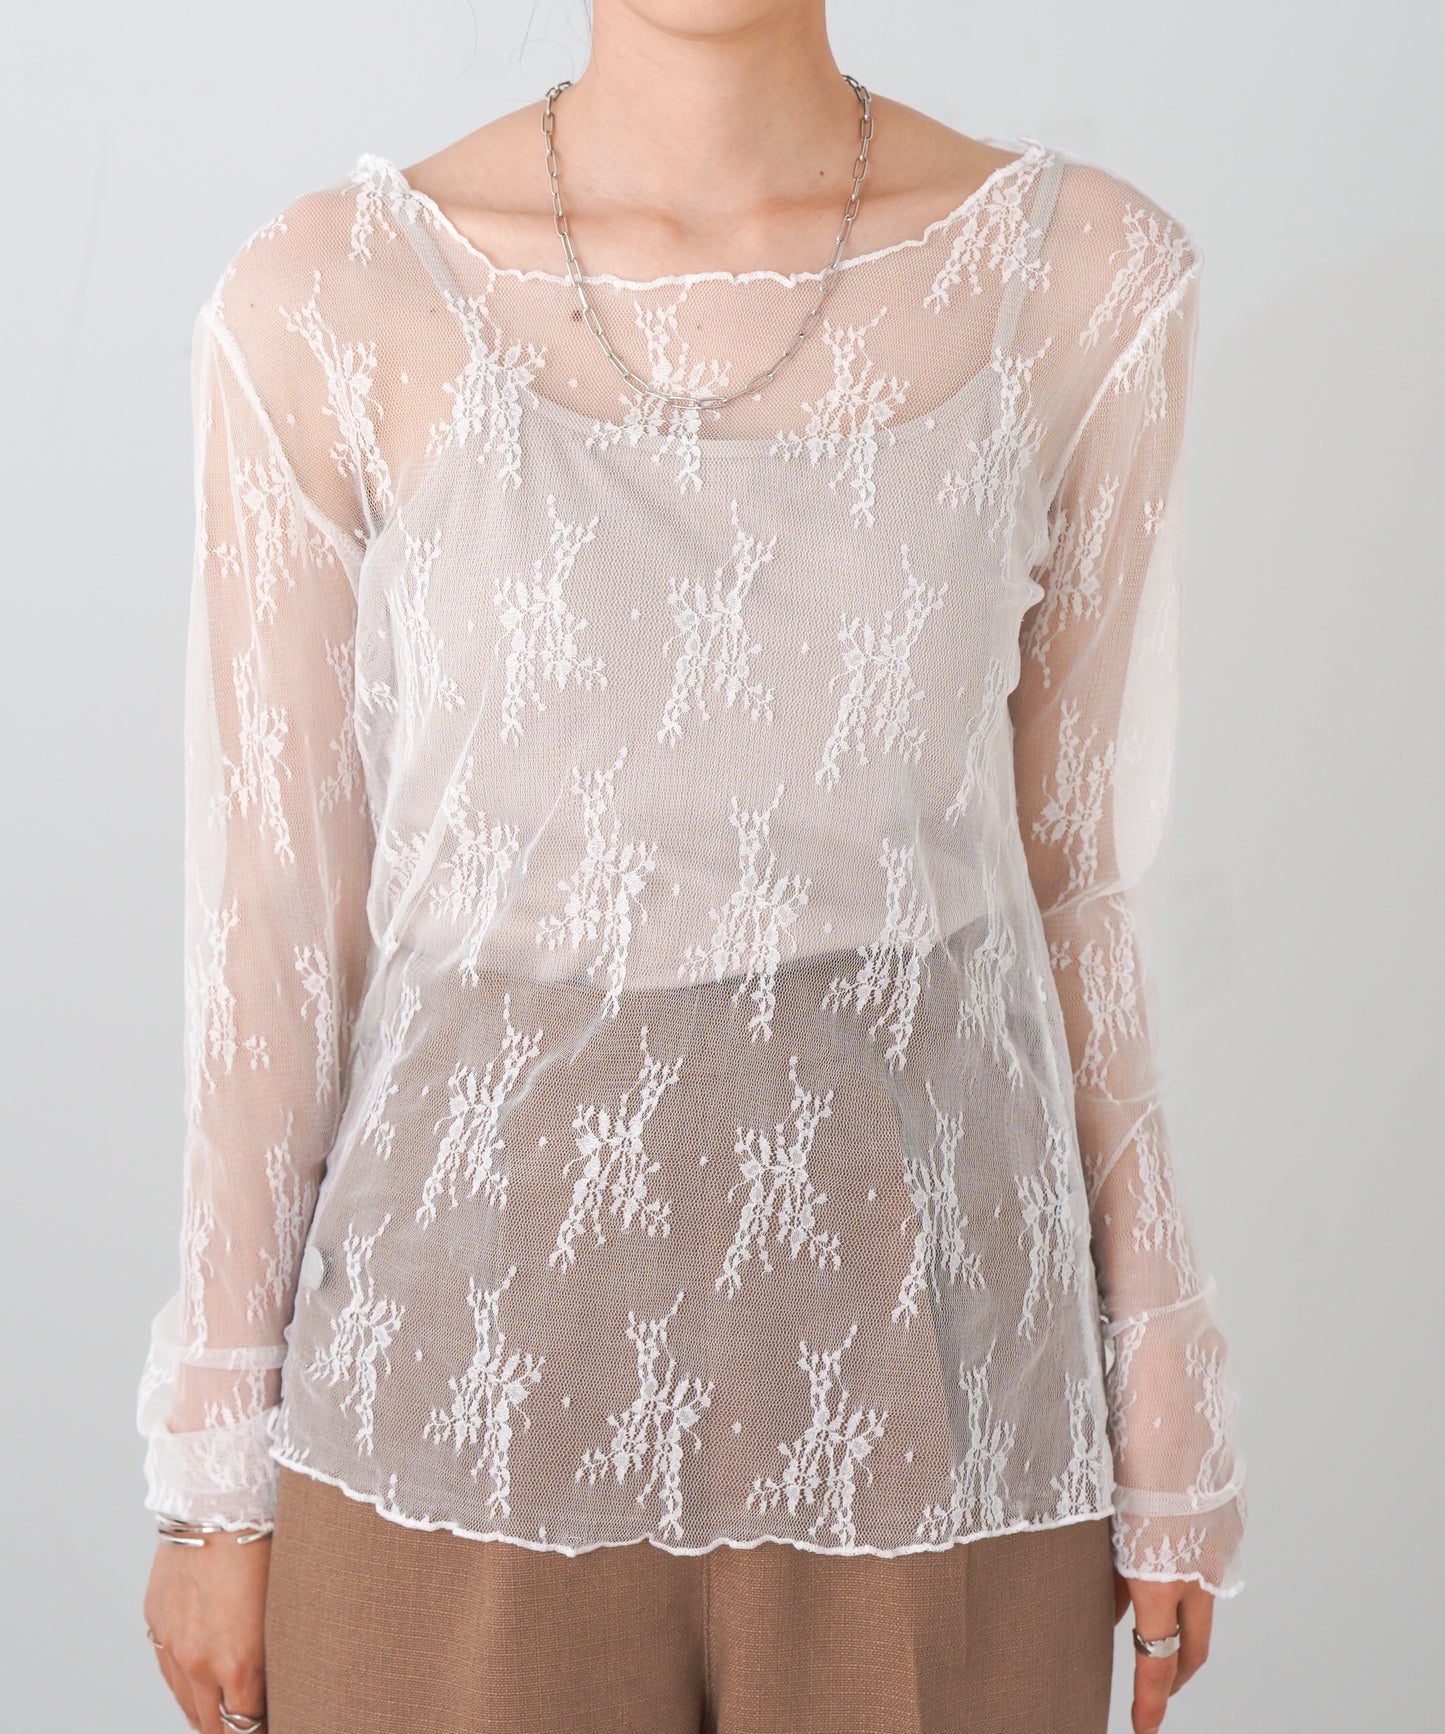 LACE SHEER INNER TOPS